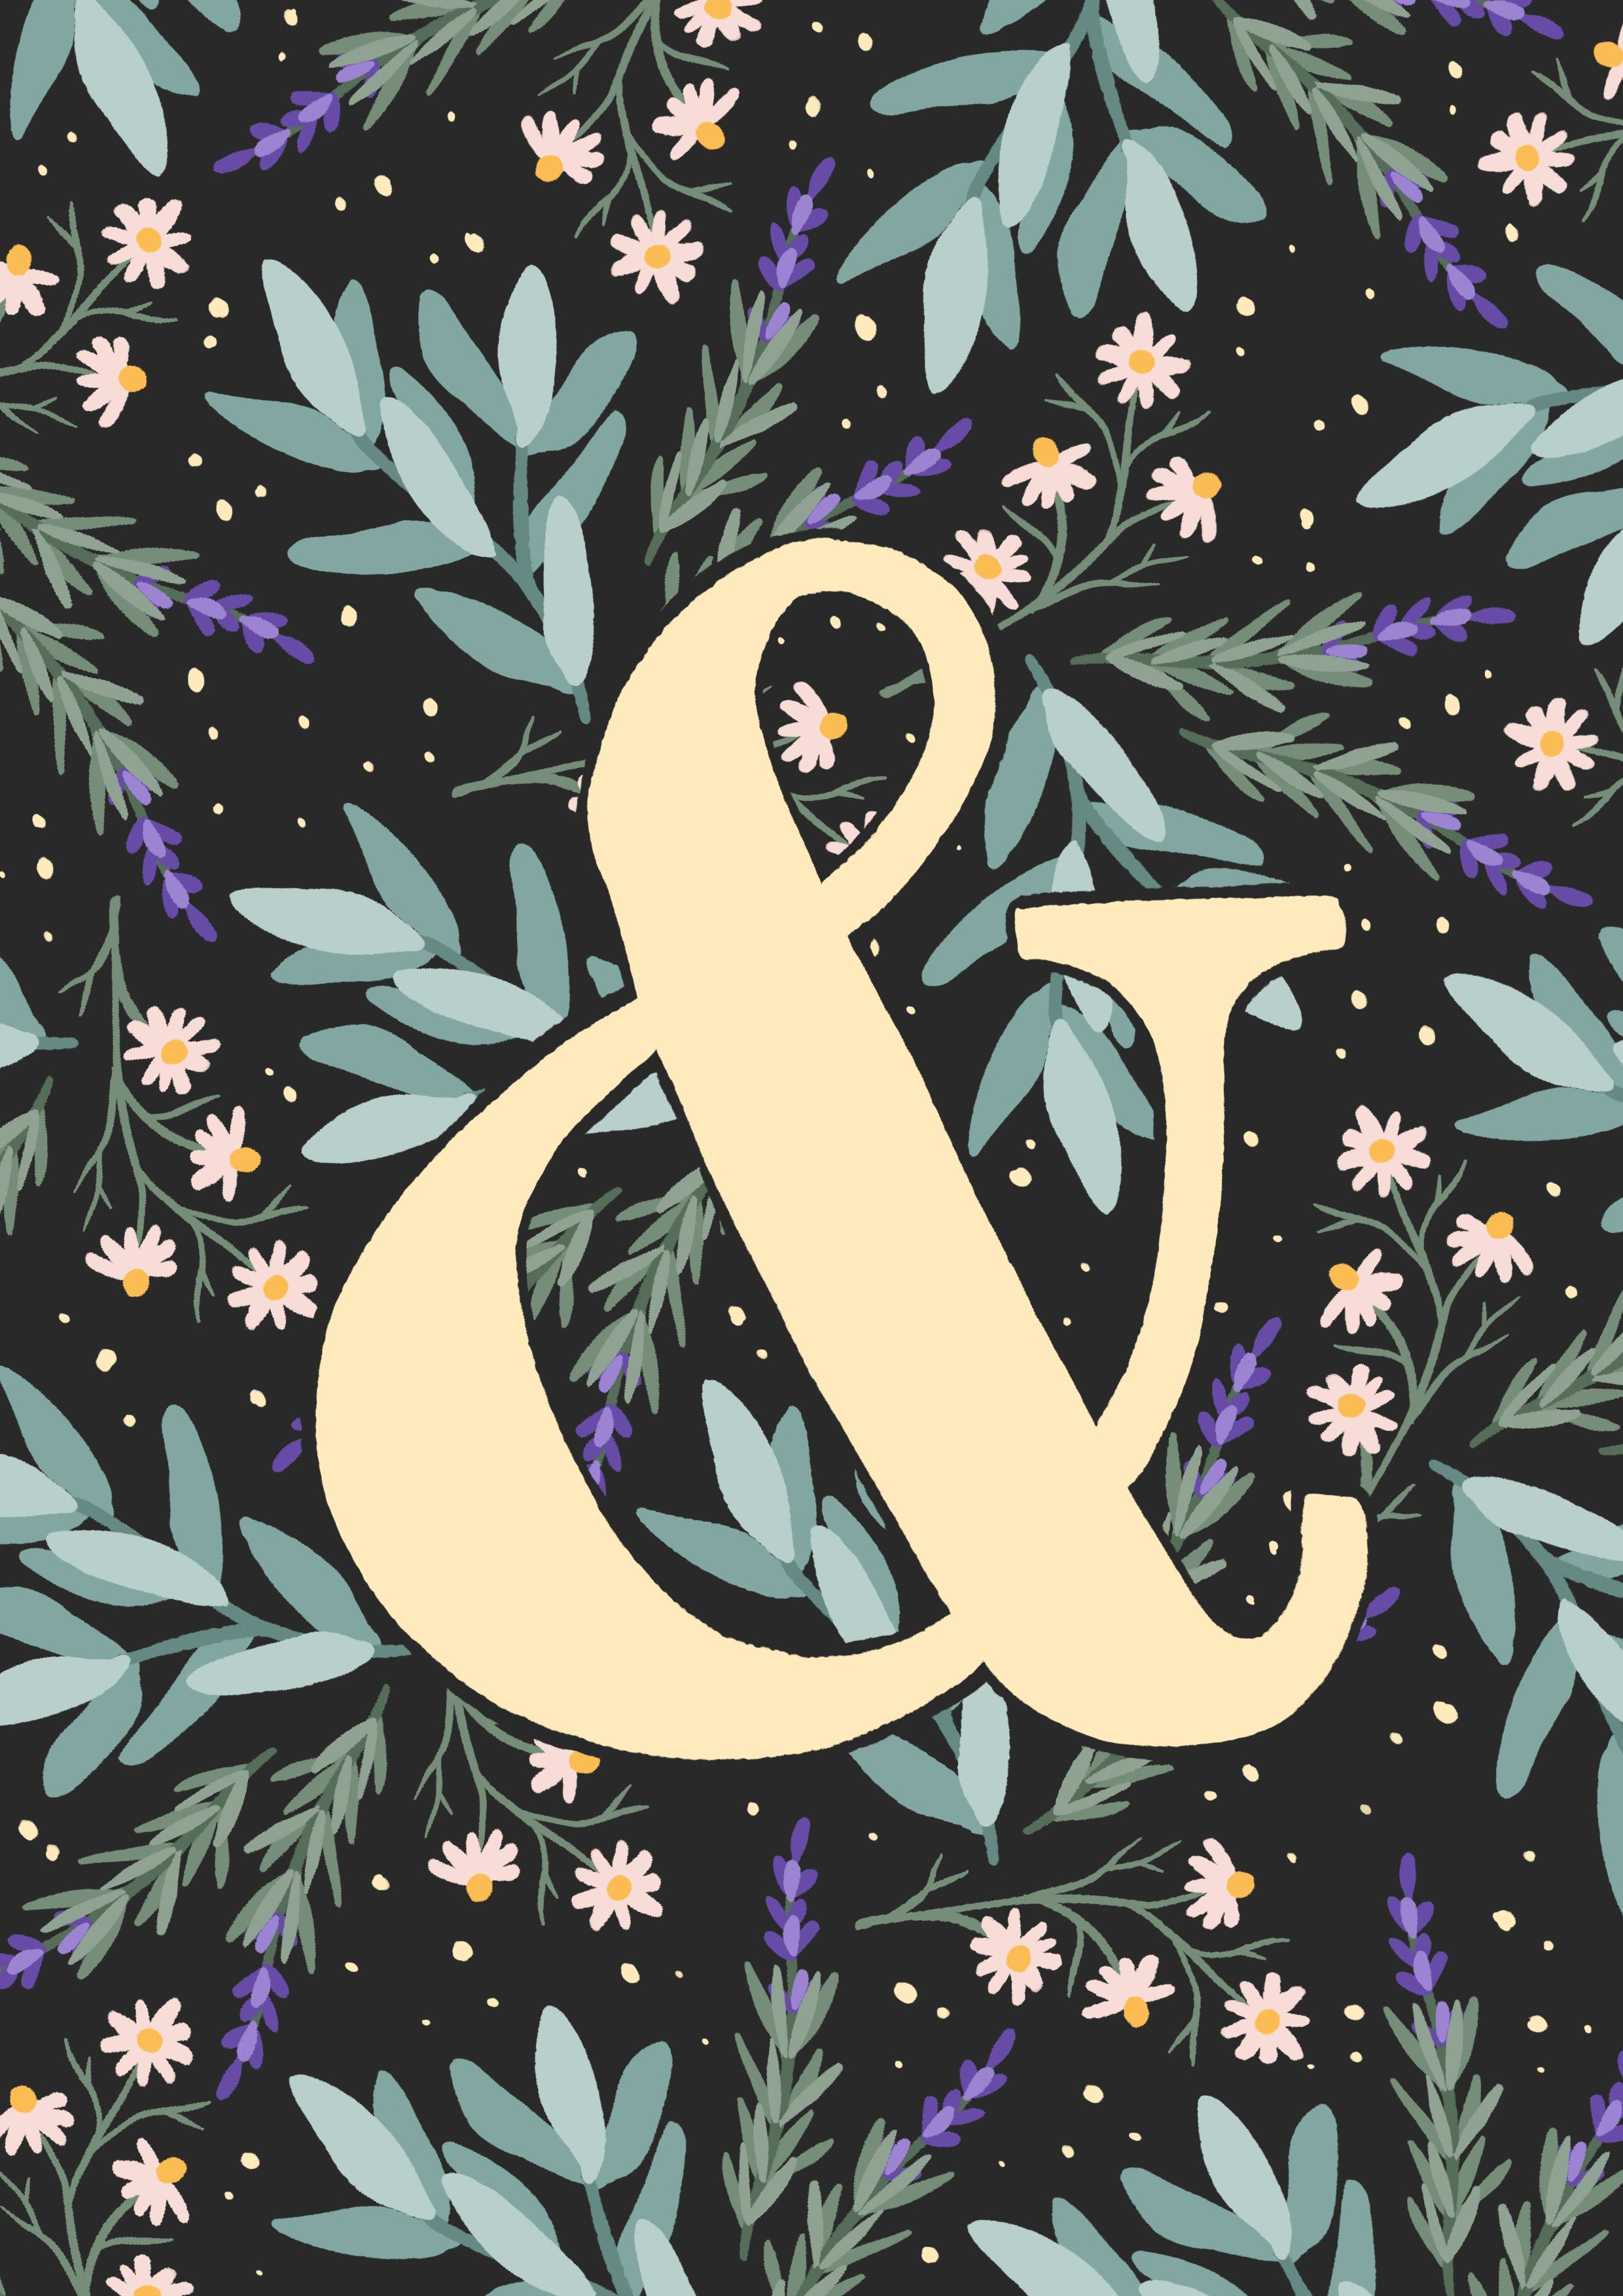 "&" on a floral black and green background